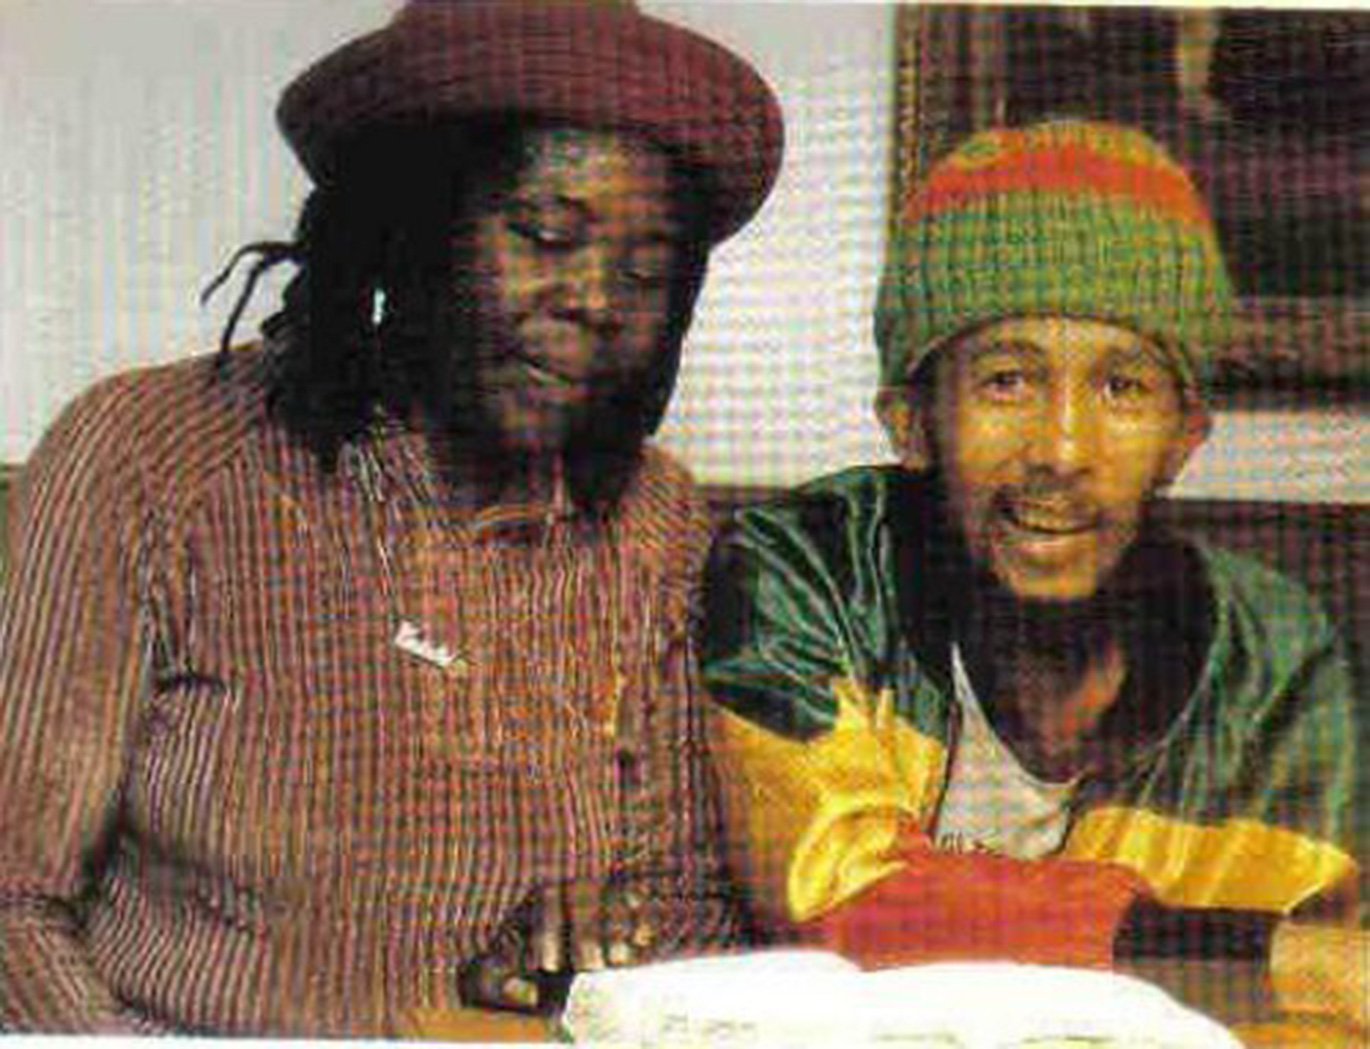 Bob Marley-The last known photograph of Bob Marley sees him hanging out with his family in Munich, Germany. The painfull frail reggae legend weighed just 77lbs in this pic and eventually succumbed to cancer on May 11, 1981